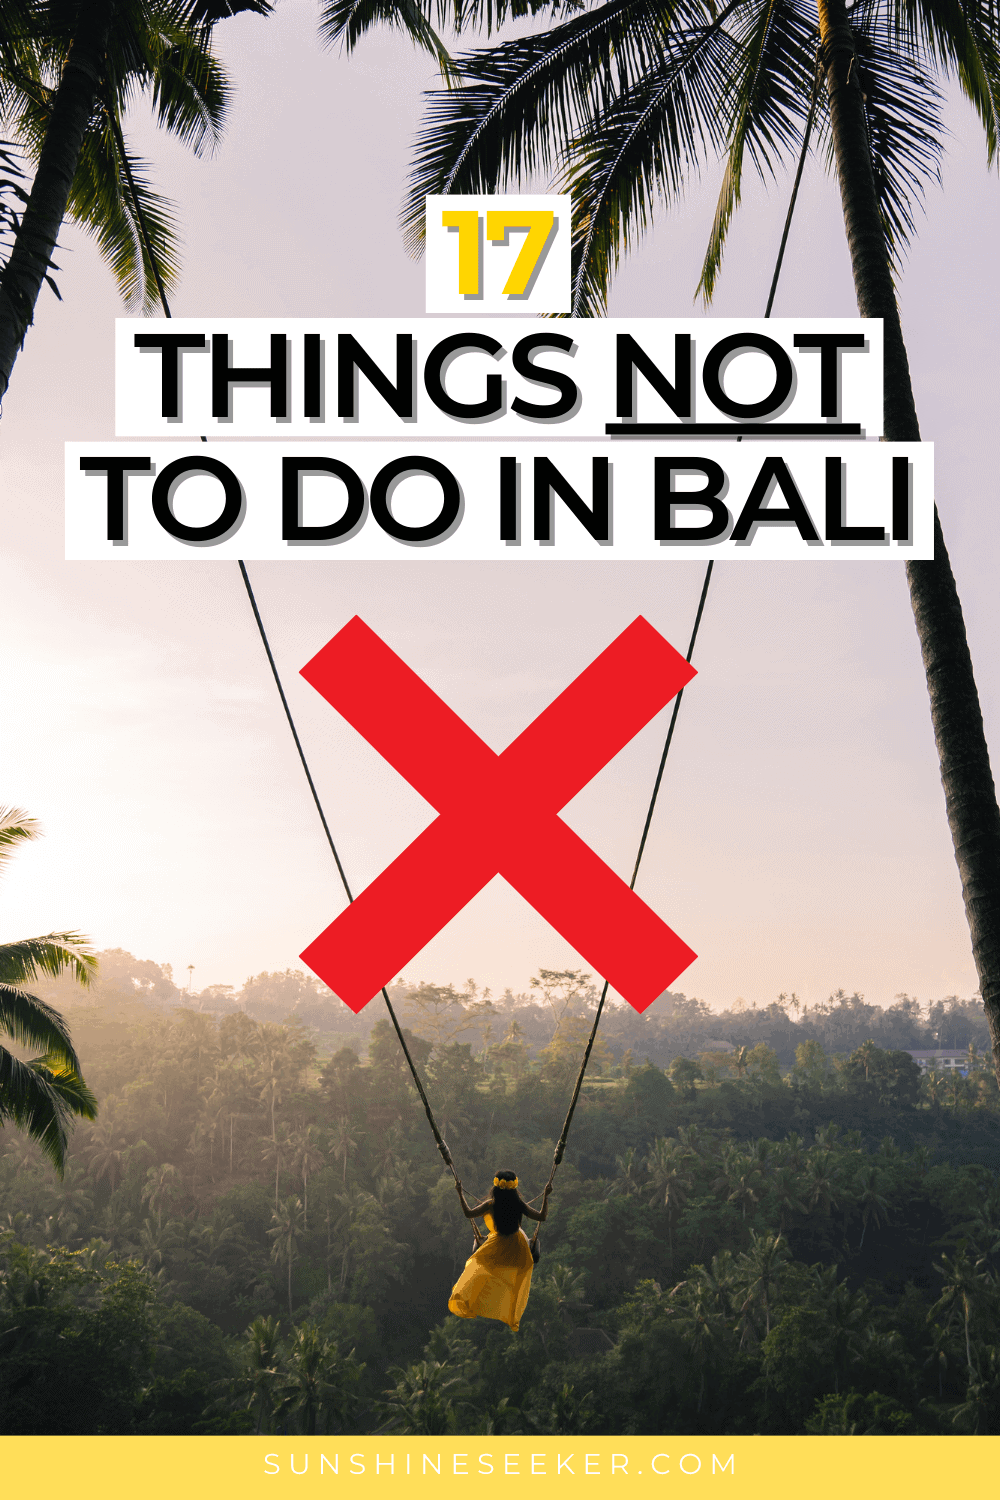 17 tourist mistakes to avoid in Bali. Is it safe to drink iced drinks in Bali? Do I need a license to drive a scooter in Bali? How to best get around the island ++